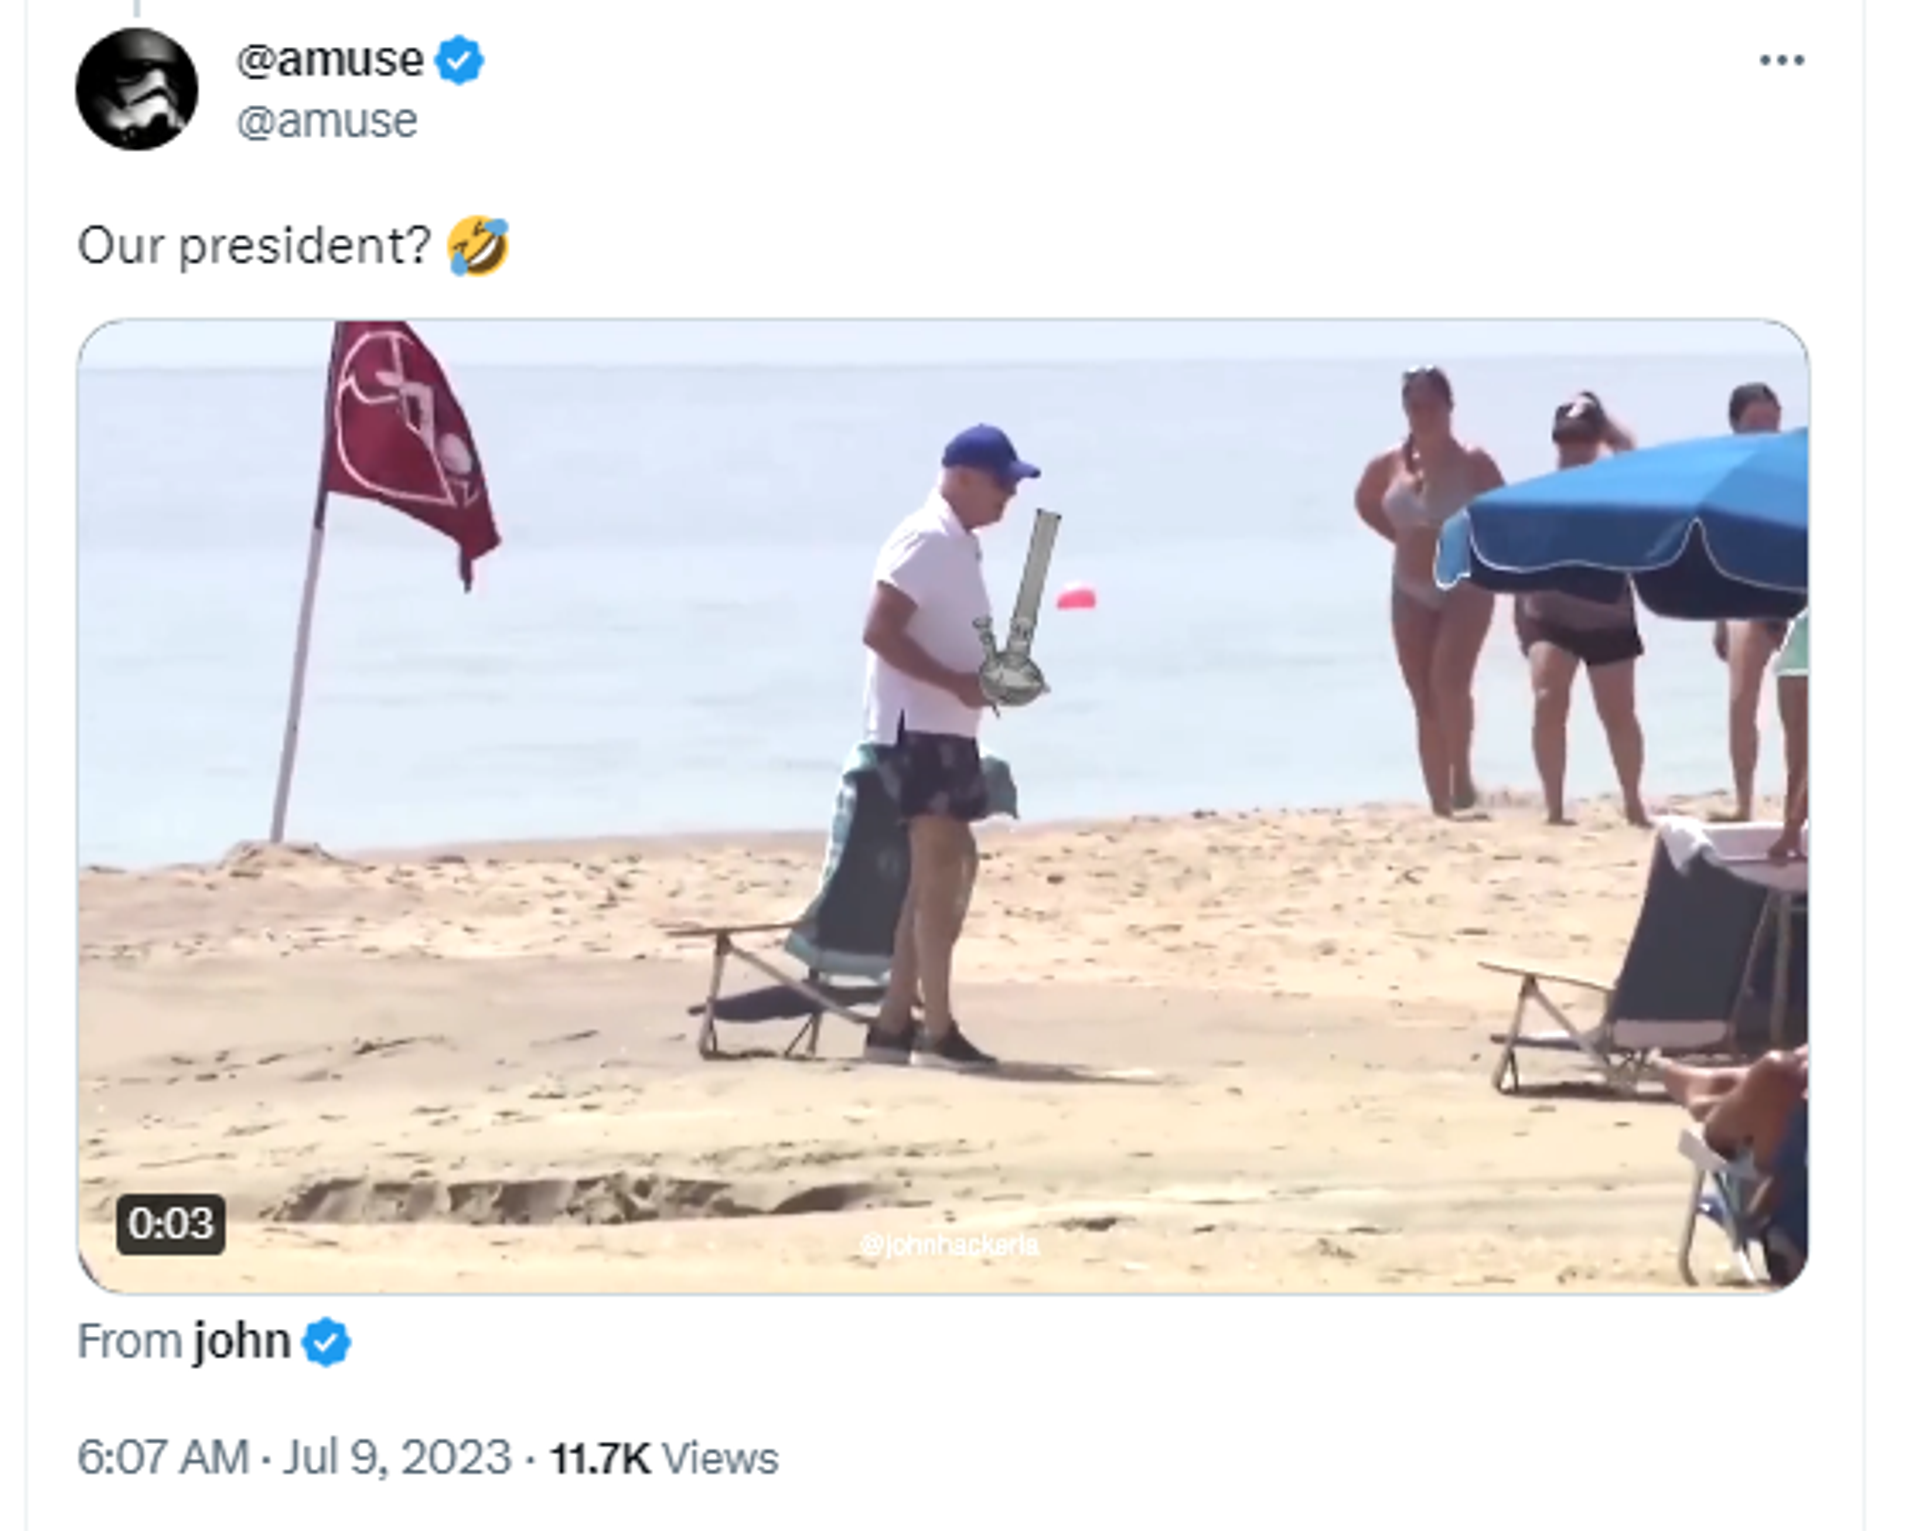 Twitter screenshot featuring photoshopped image of US President Joe Biden on the beach with a bong in his hands. - Sputnik International, 1920, 09.07.2023